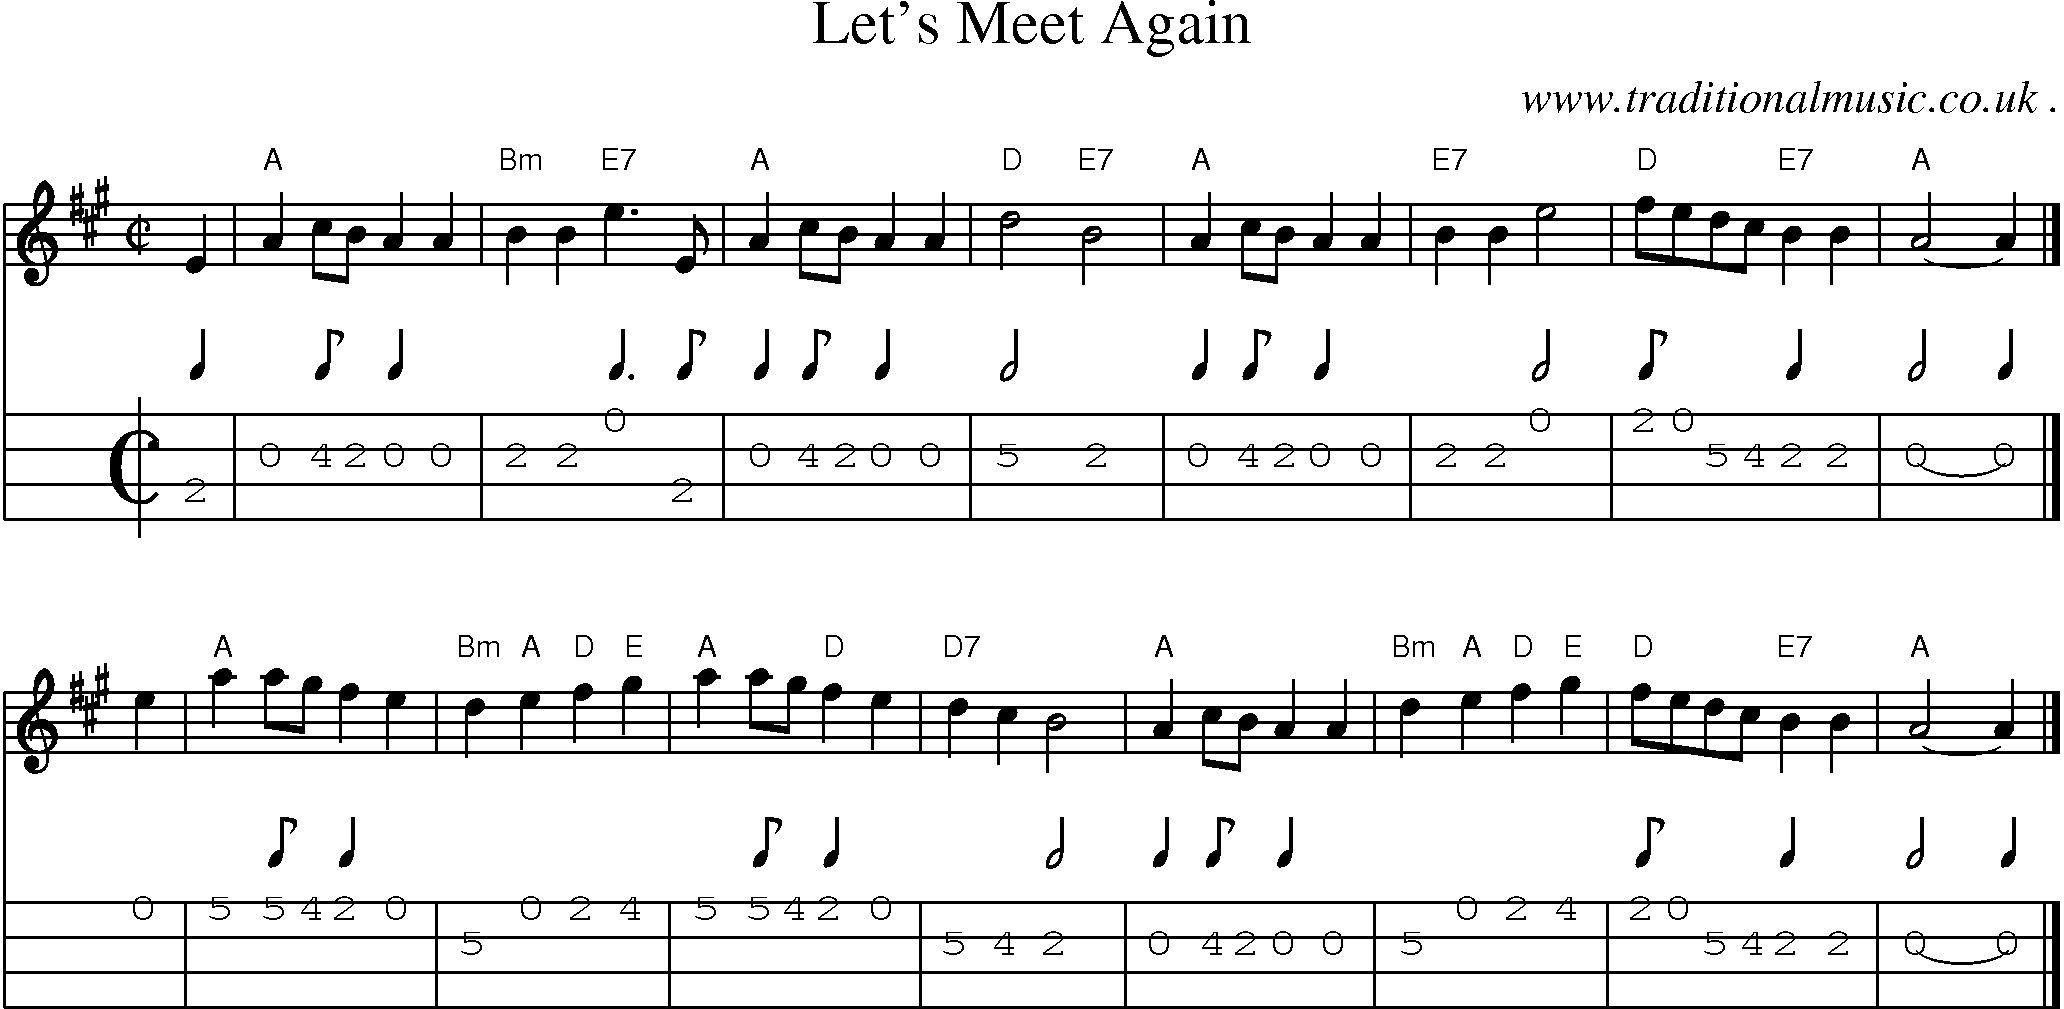 Sheet-music  score, Chords and Mandolin Tabs for Lets Meet Again